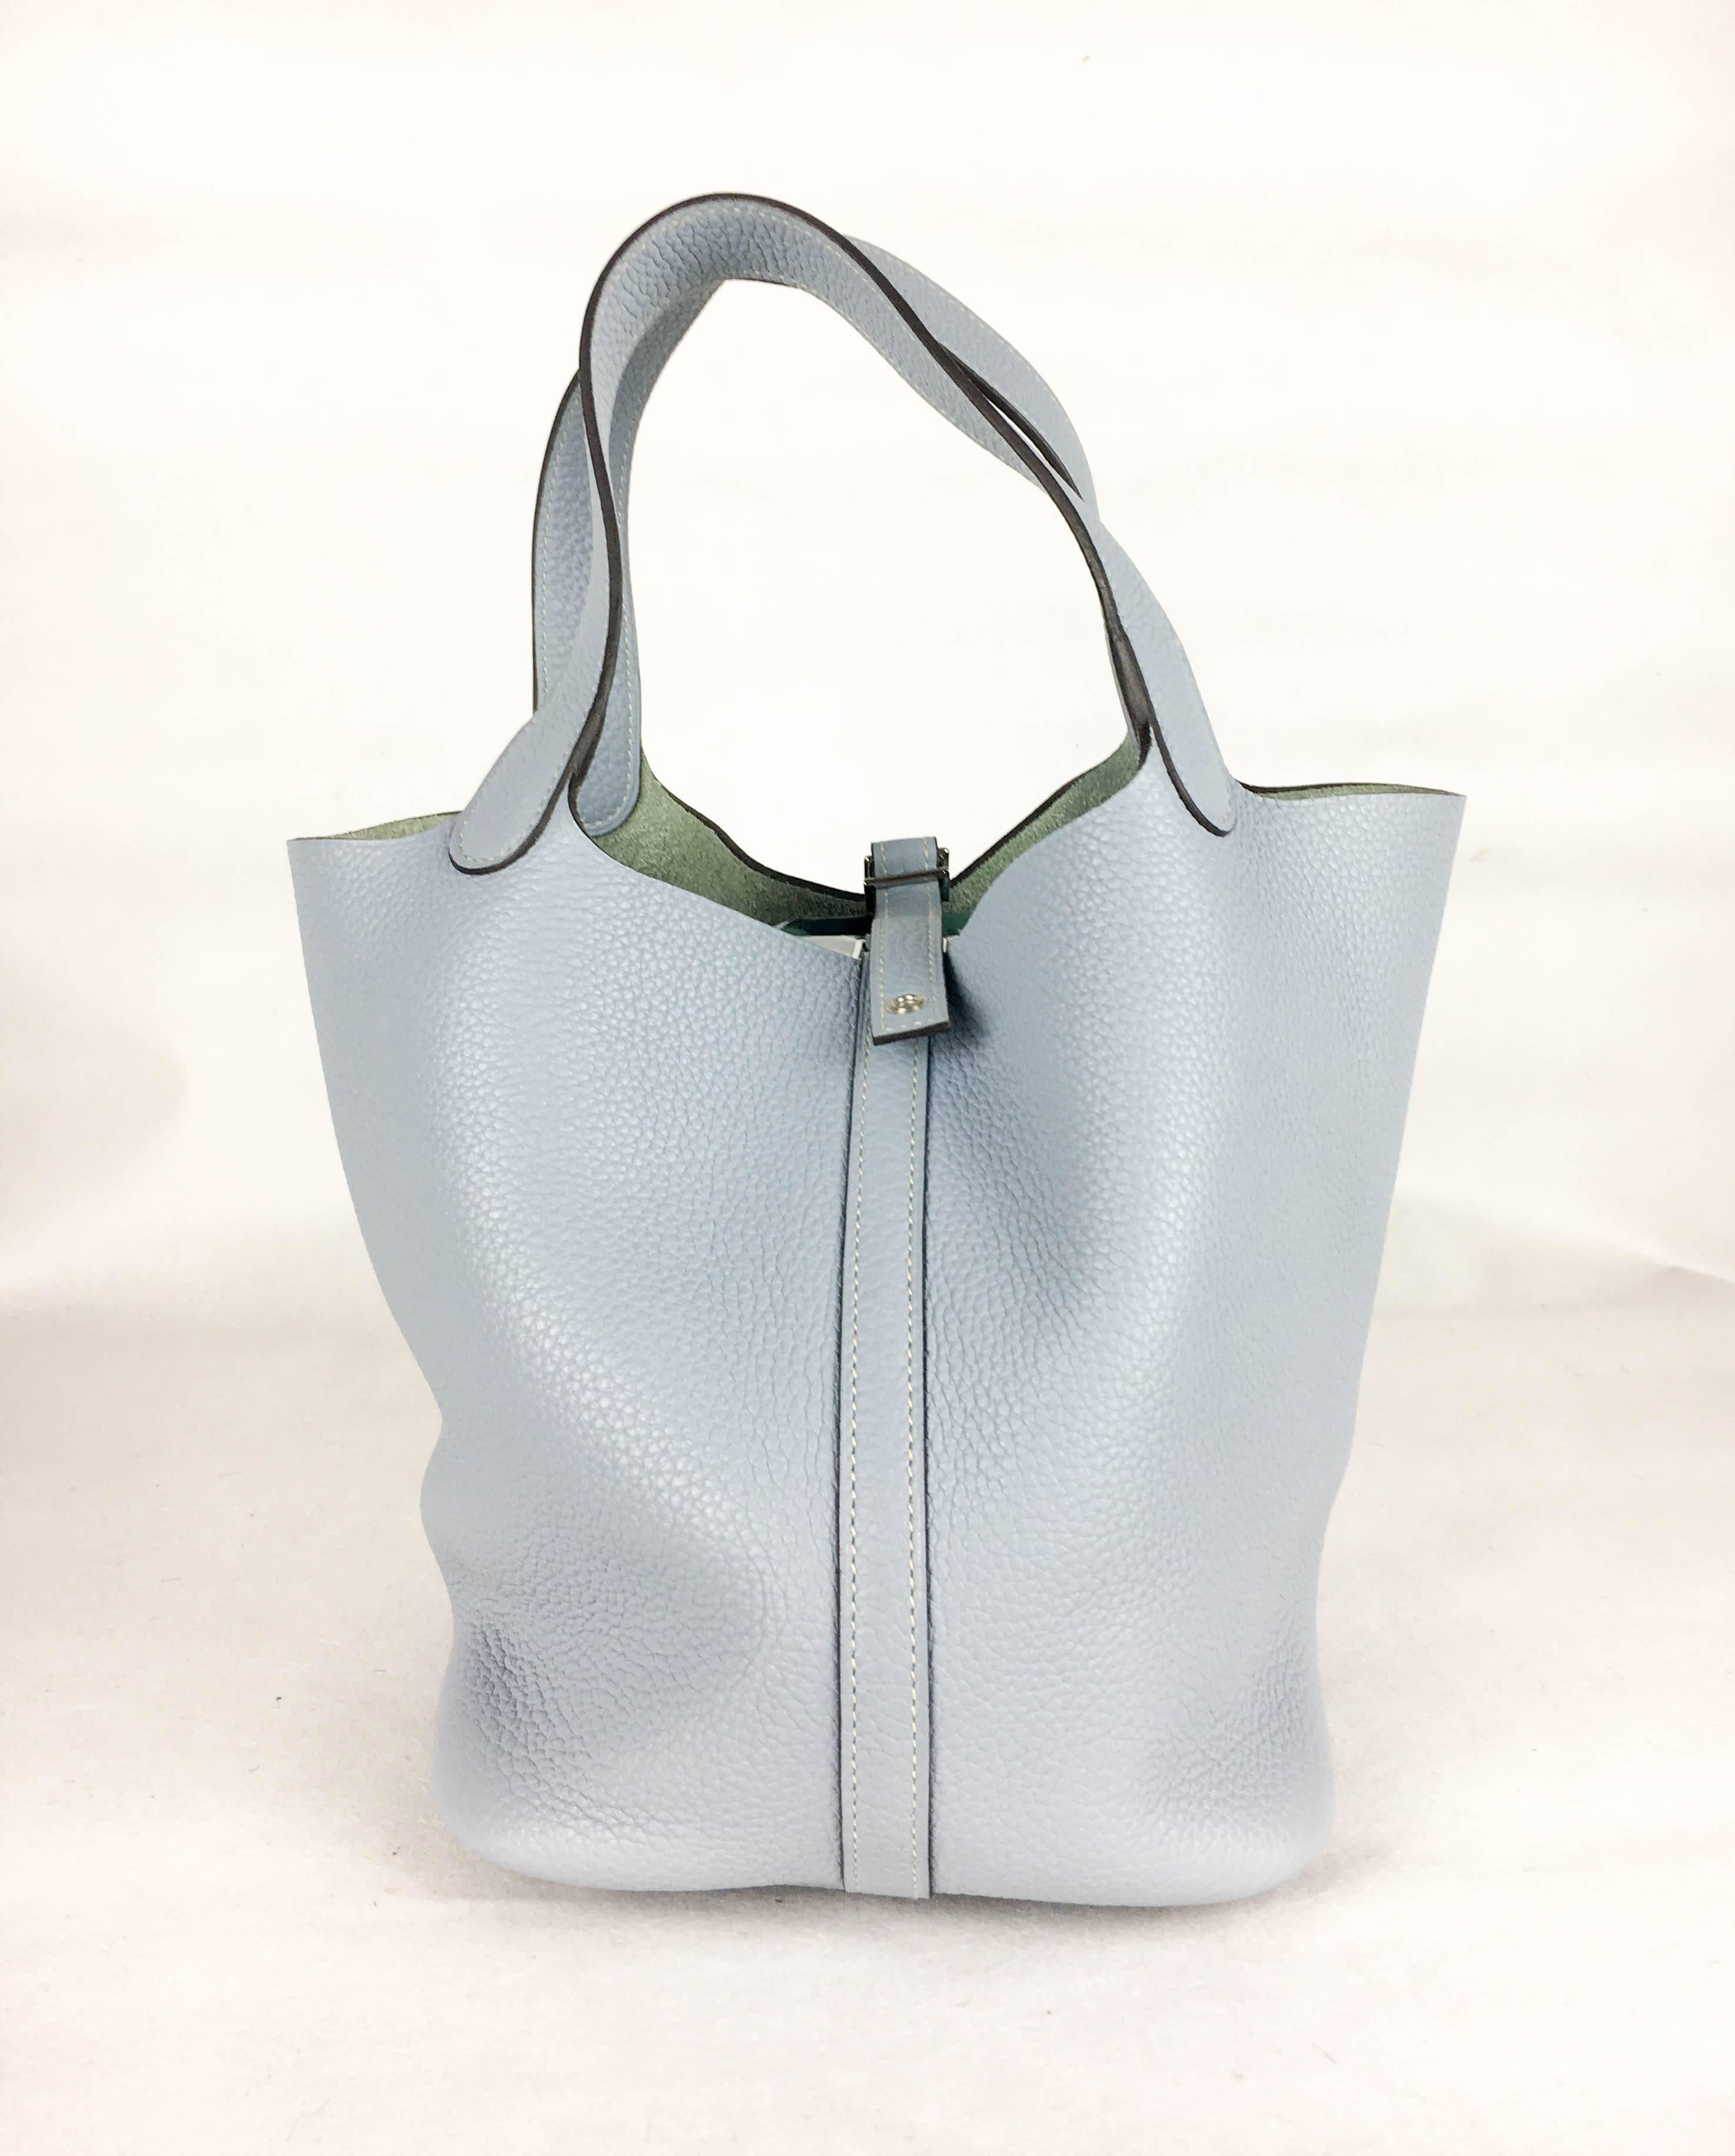 Gorgeous Hermes Picotin Lock Handbag. In pale blue clemence leather and palladium hardware, this is a very stylish handbag by Hermes. This handbag originally came with the lock to attach at the end of the strap, but, unfortunately, it has been lost.